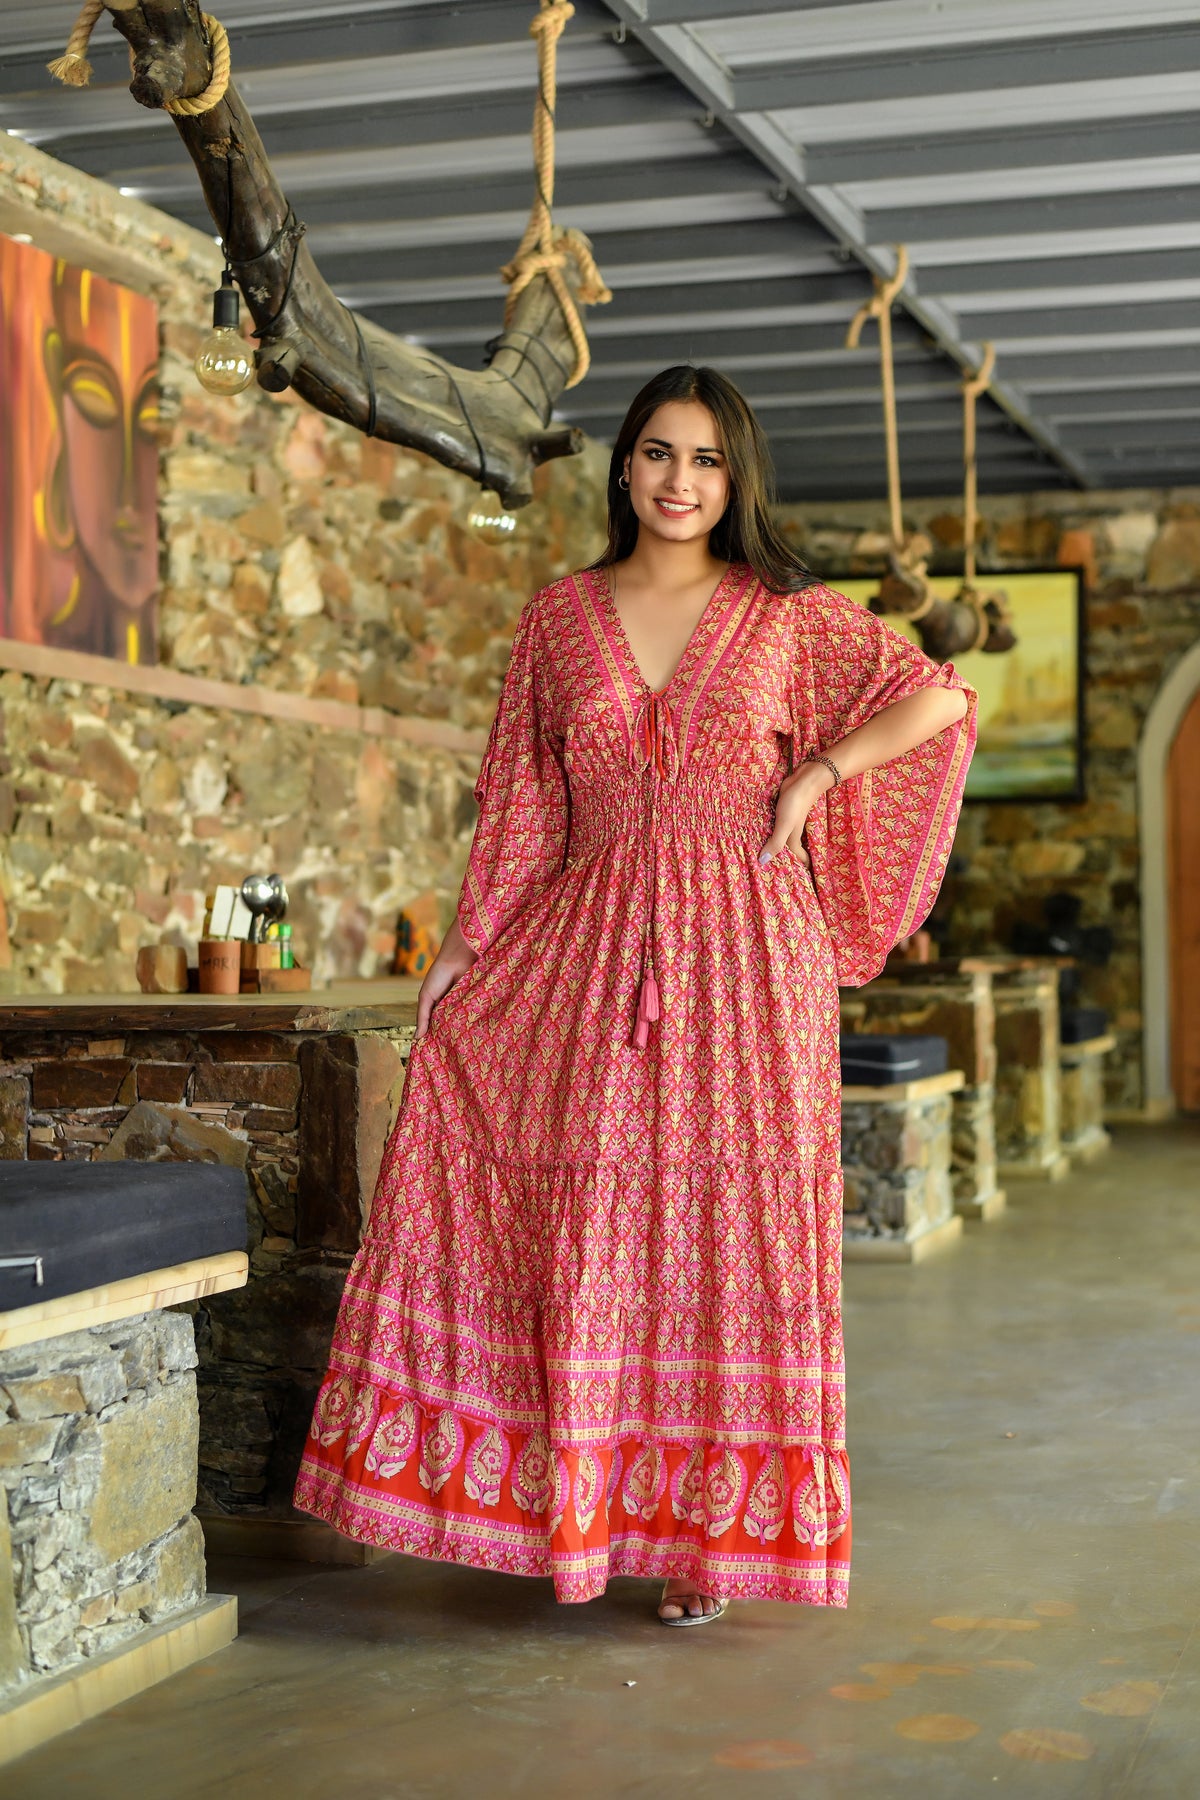 Bell Sleeves Boho Maxi Dress in Pink